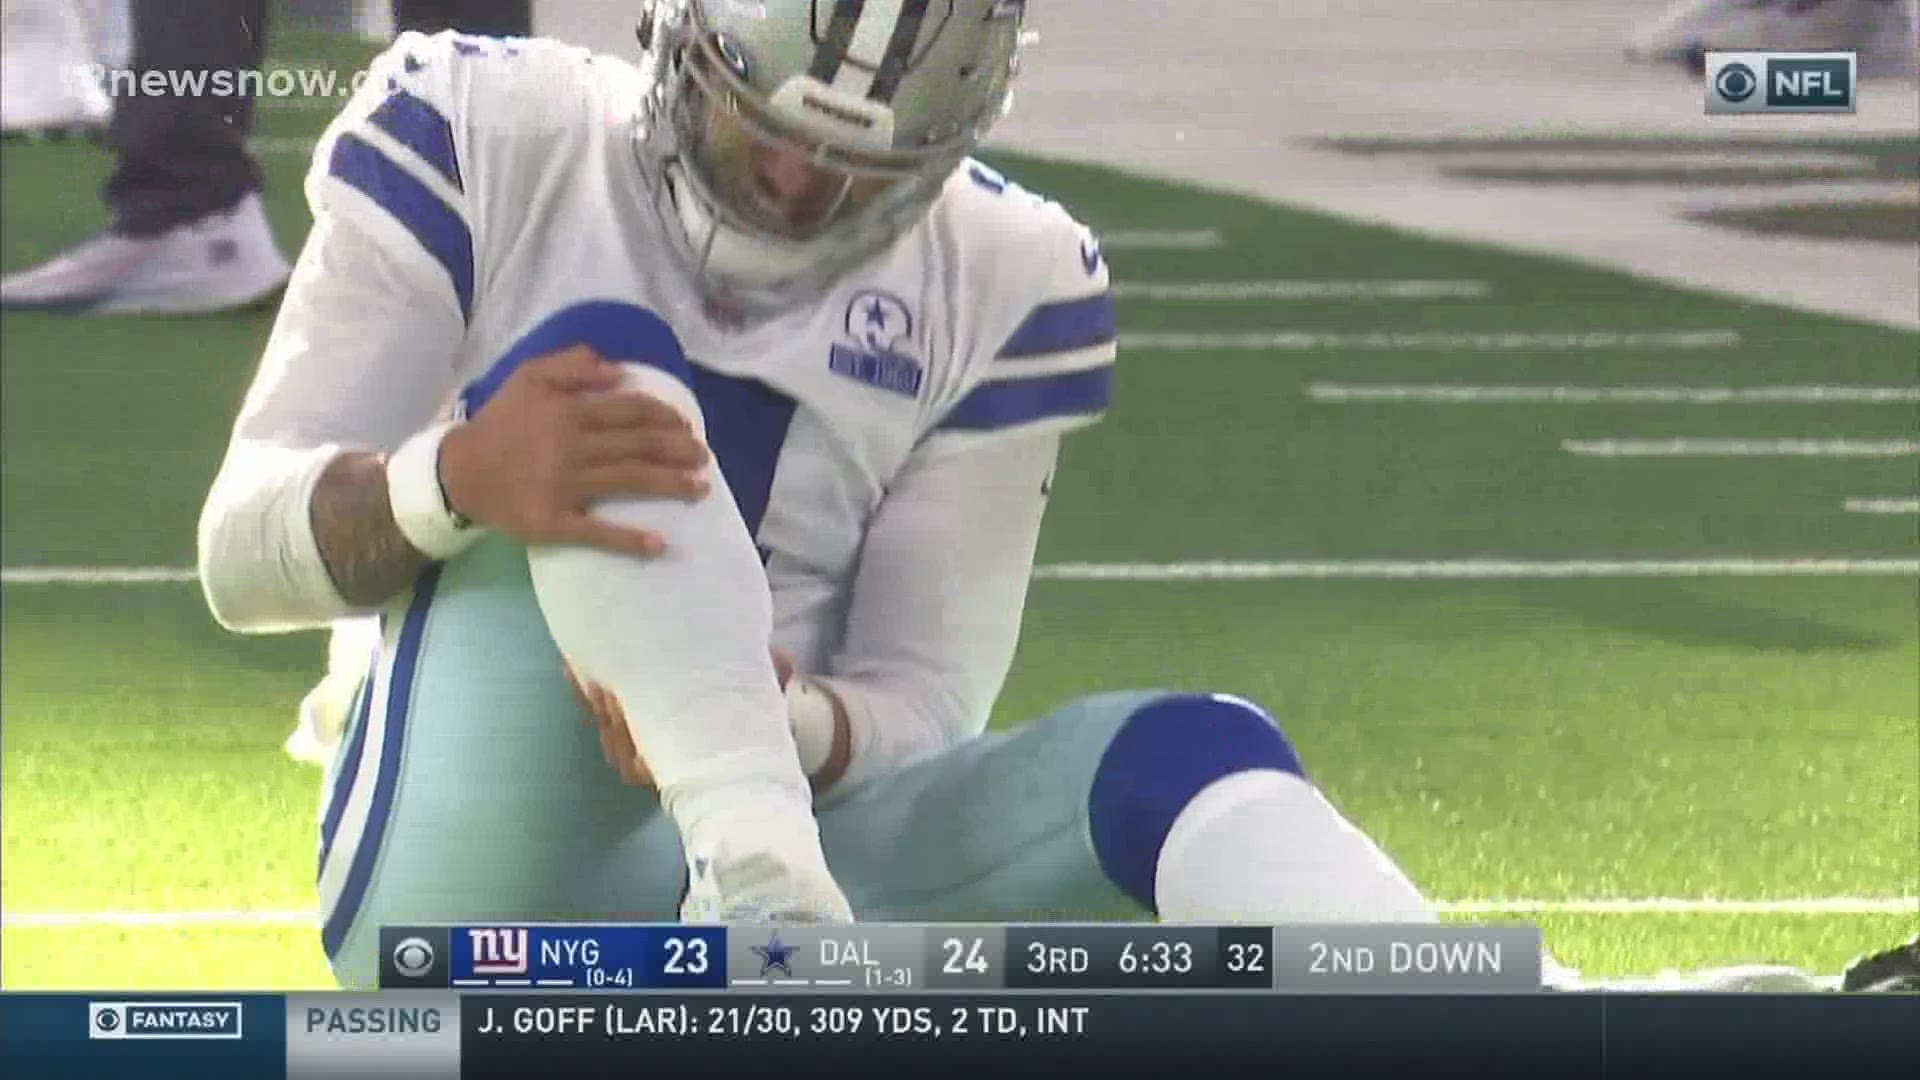 The entire sports world was flipped upside down Sunday when Cowboys quarterback Dak Prescott suffered a dislocated right ankle and a compound fracture.